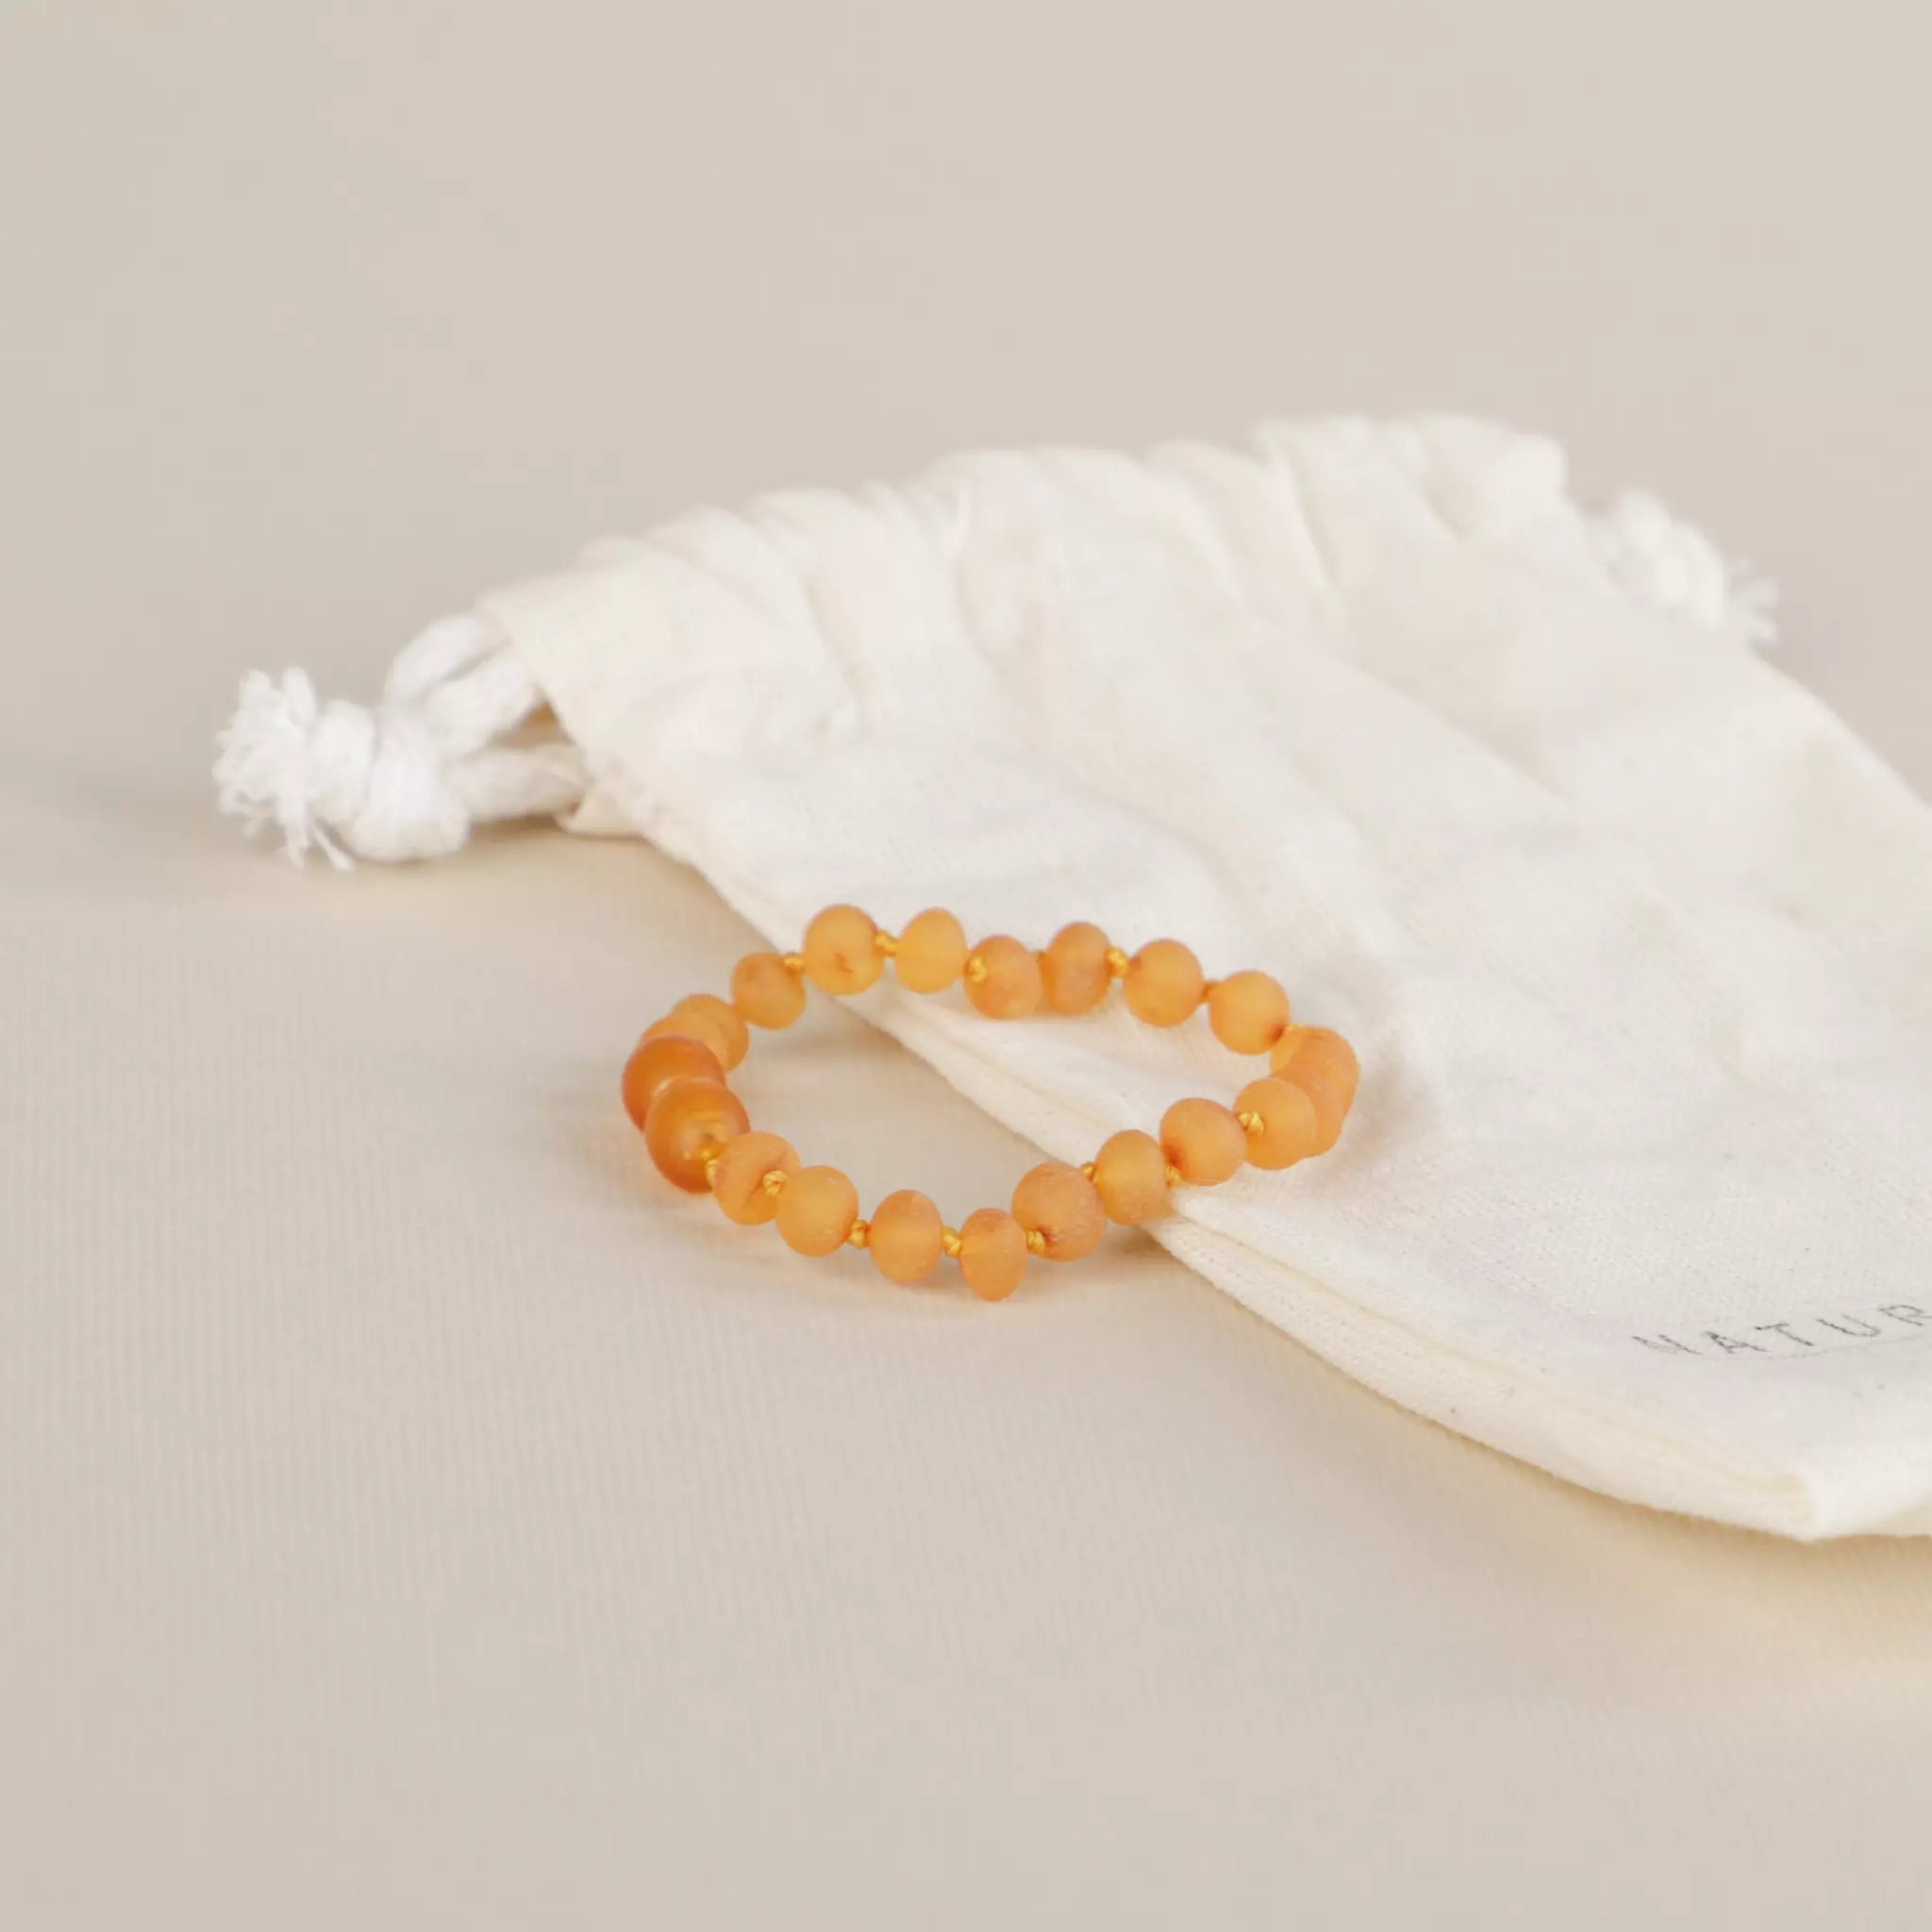 Amber teething necklaces: Are they safe for your baby? - Today's Parent